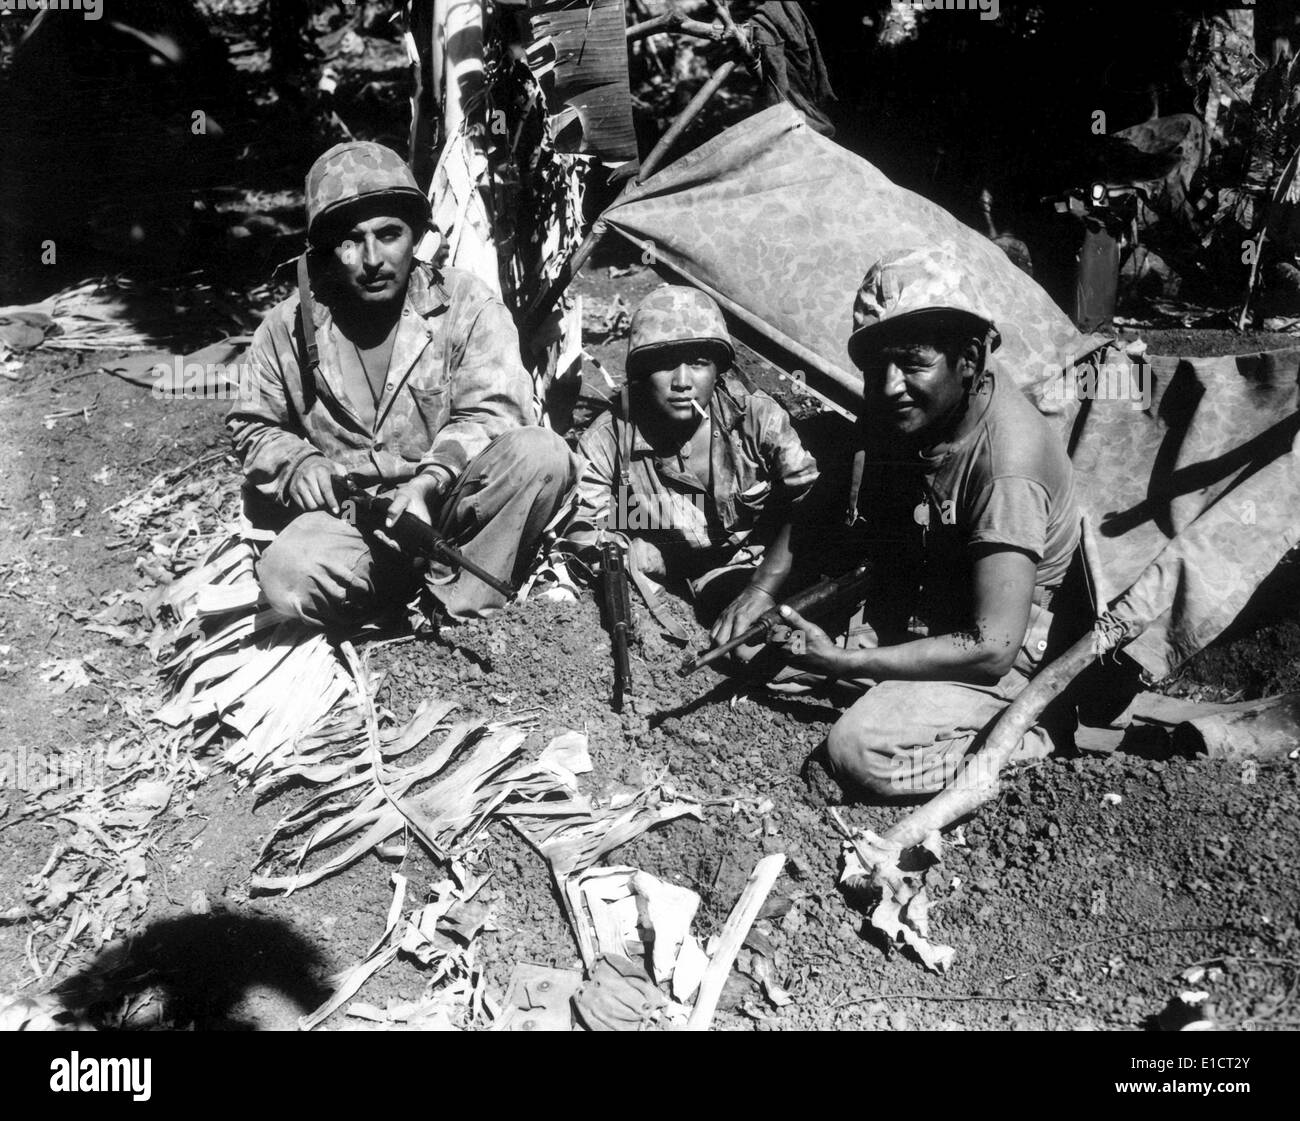 Navajo Code Talkers landed with the first Marine assault waves on Saipan against Japanese. June 1944. WINDTALKERS was a 2002 Stock Photo